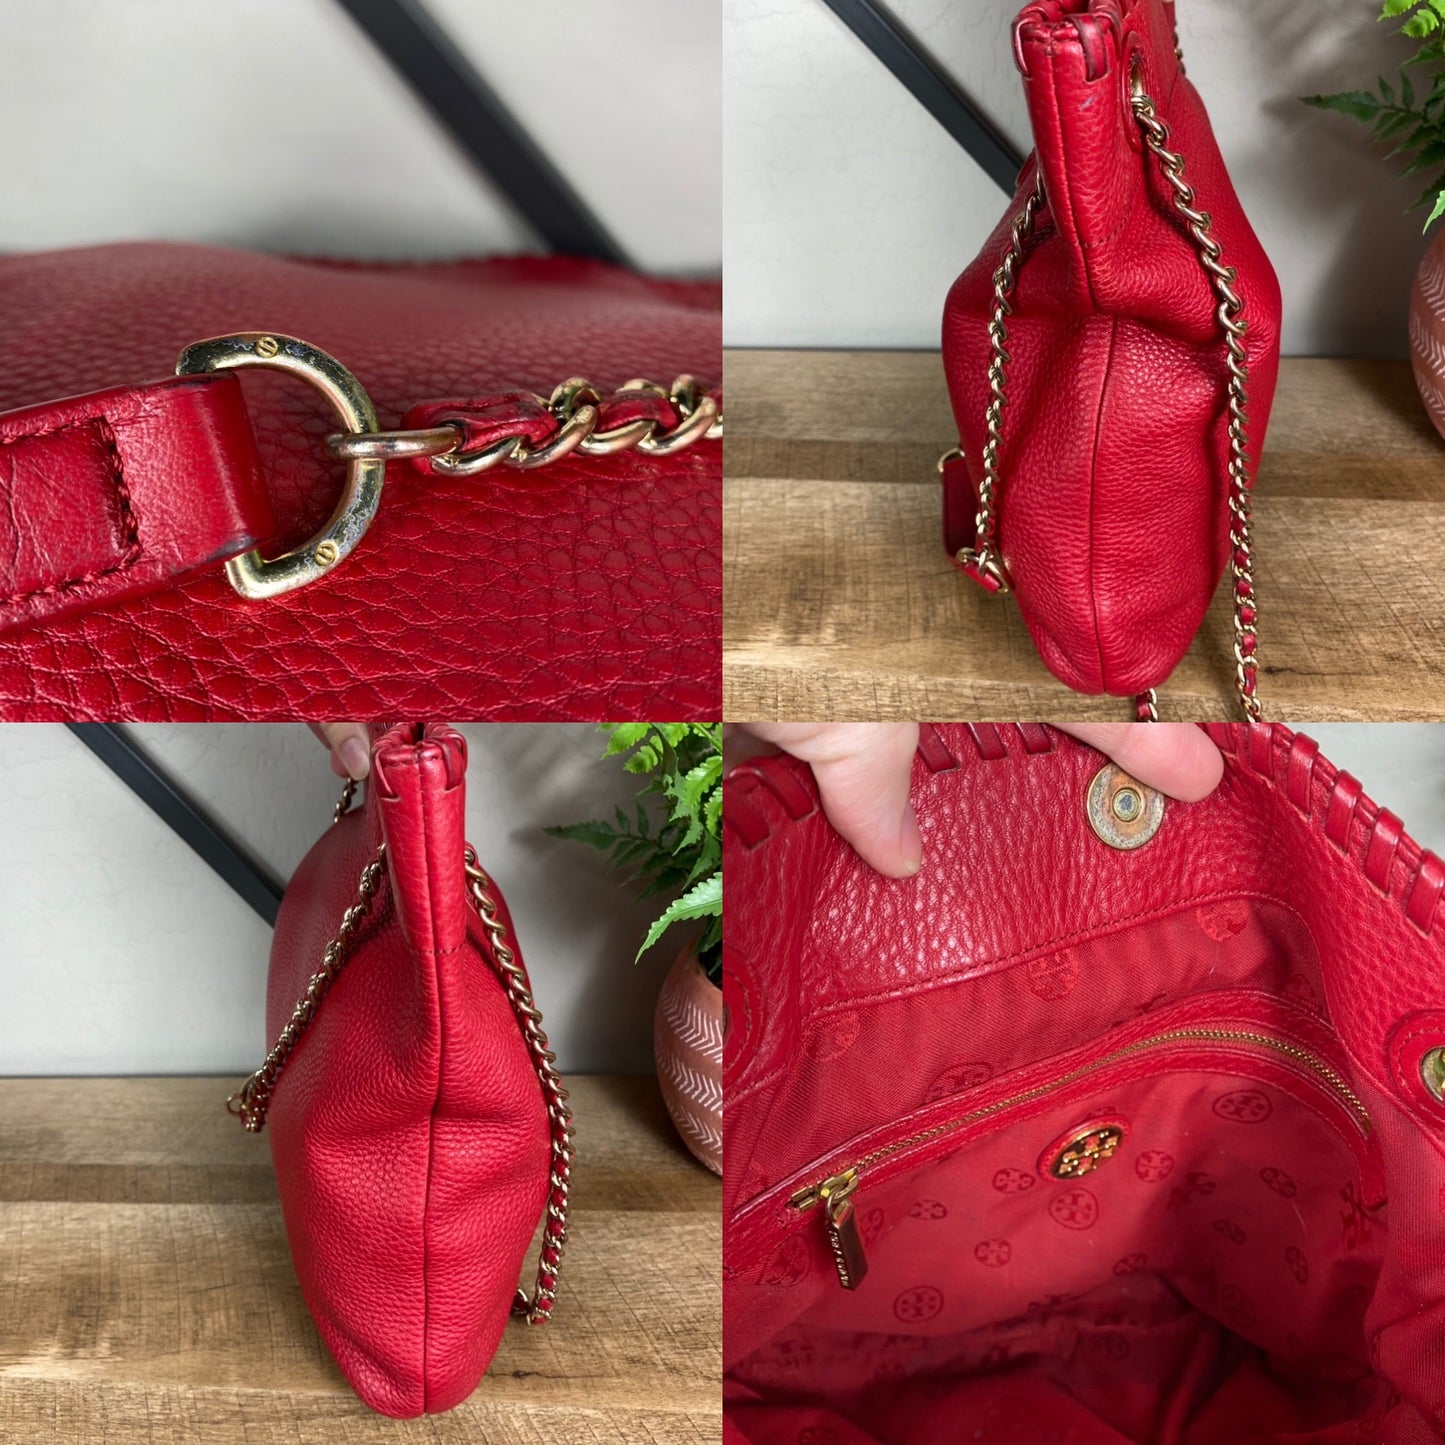 Tory Burch Leather Whipstitch Marion Bag